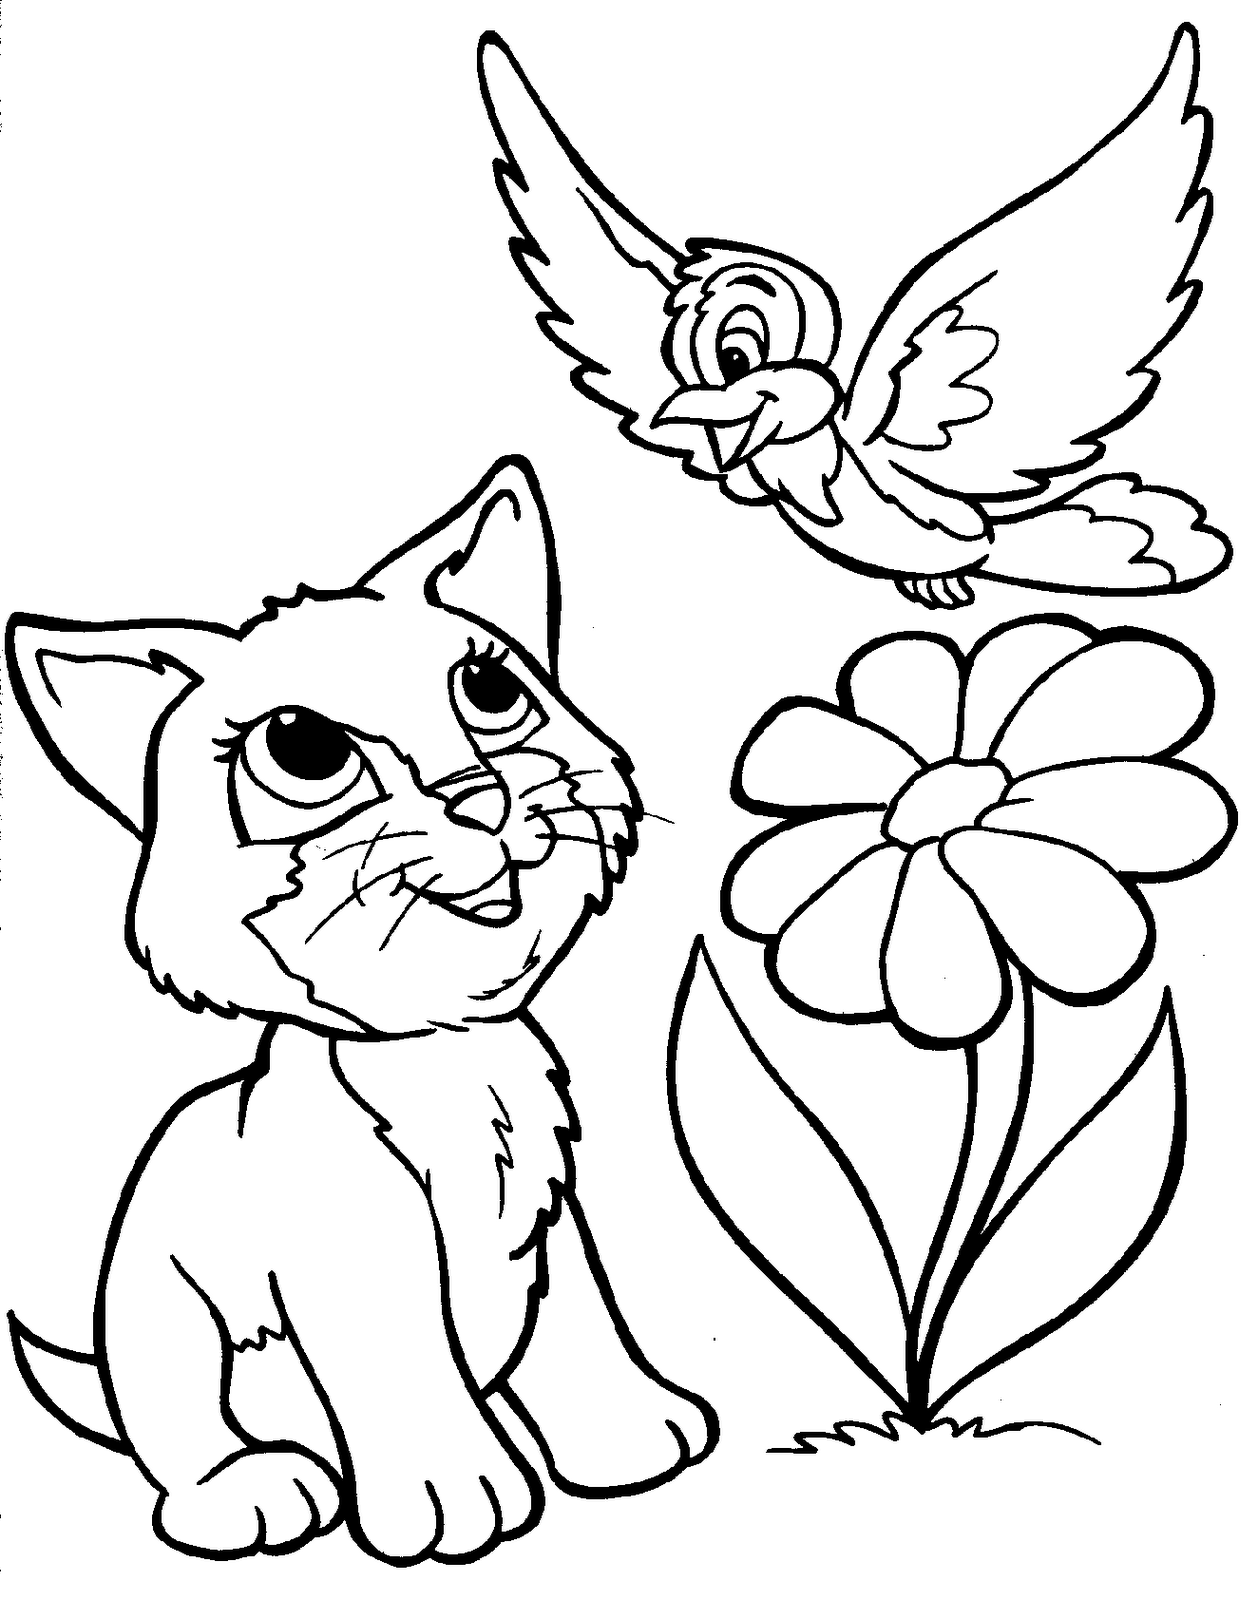 Animals cat coloring pages >> Disney Coloring Pages